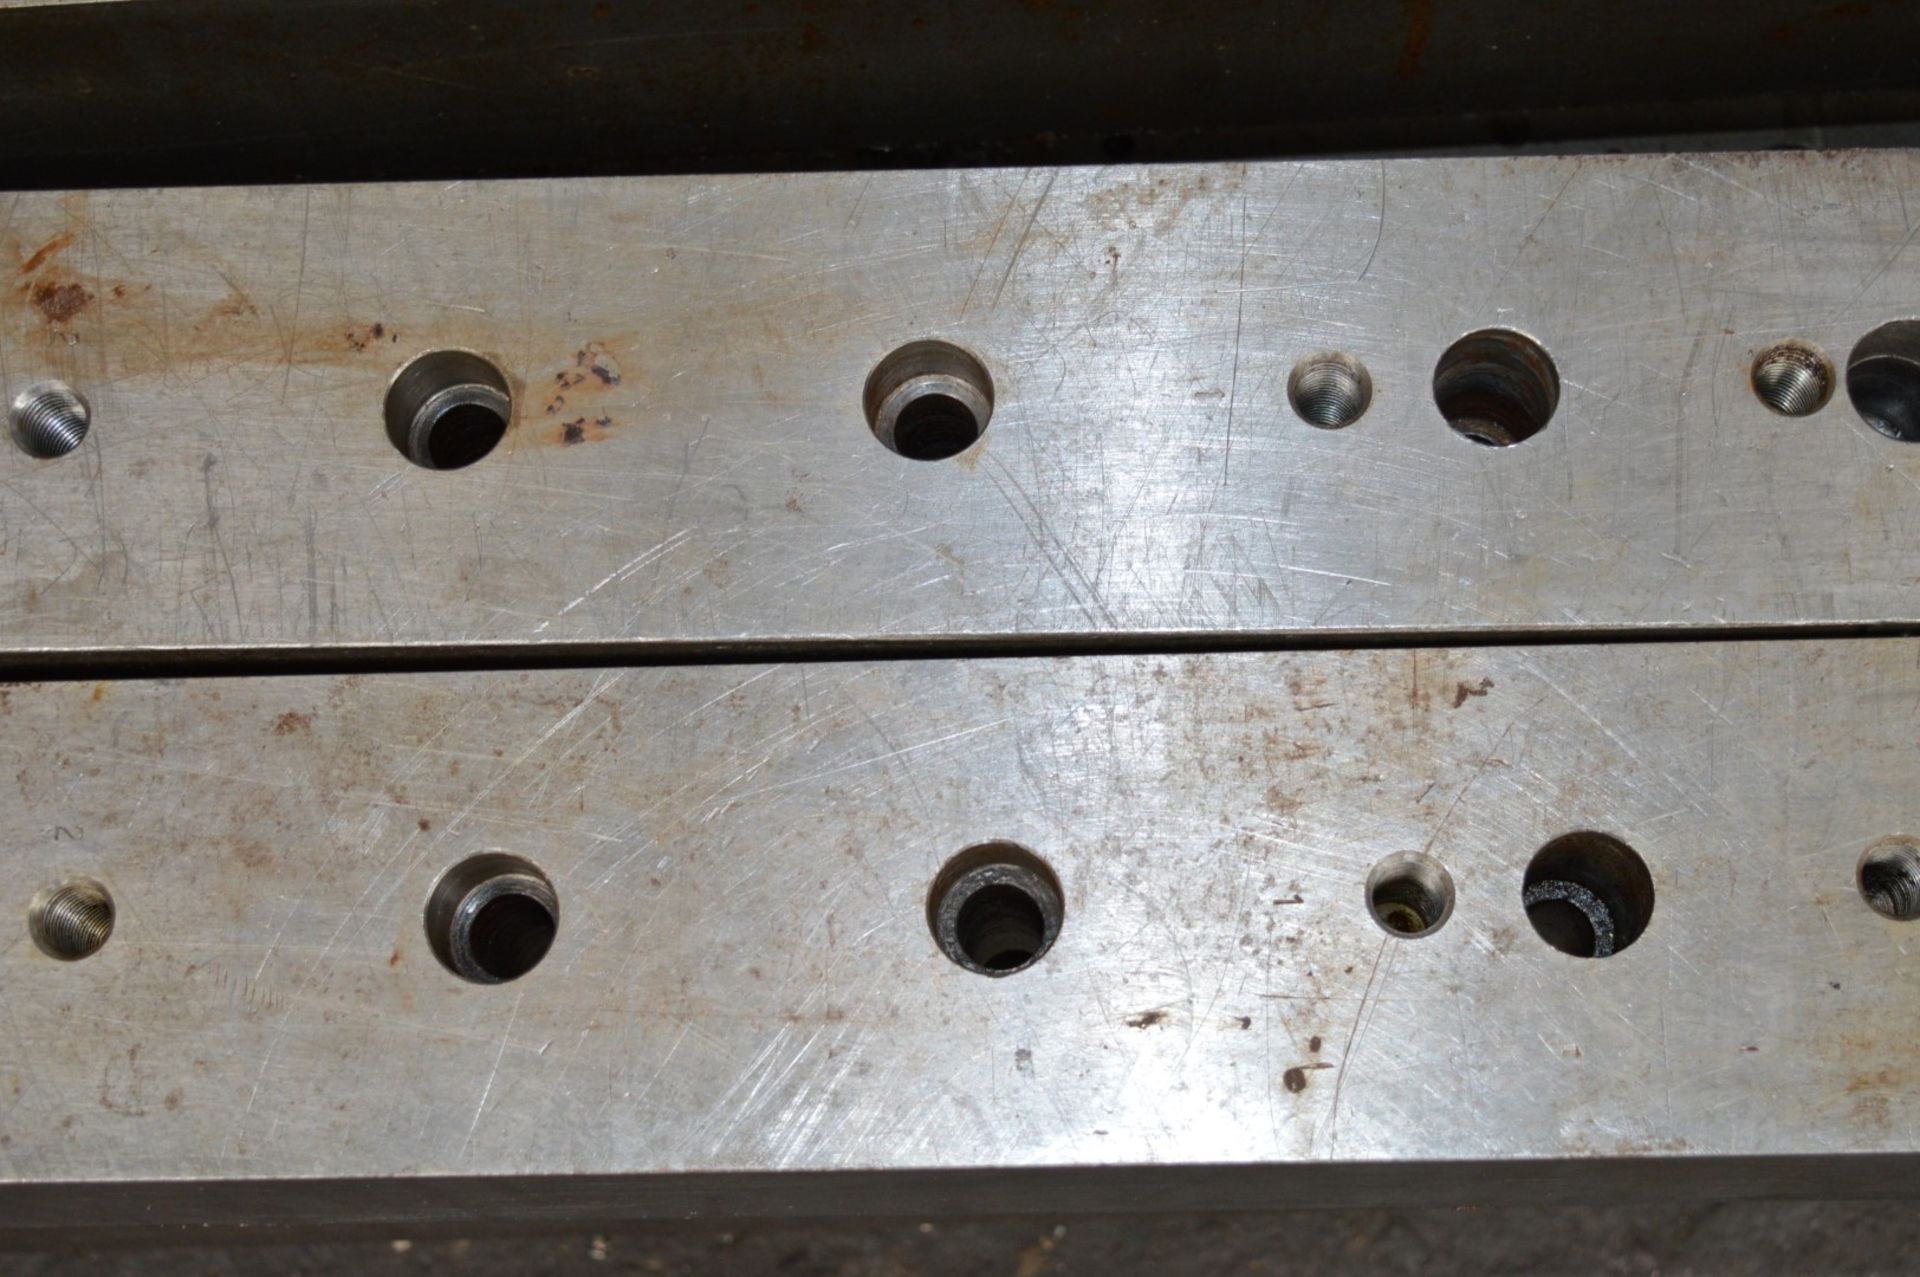 8 x Large Steel Blocks With Threaded Inserts - 91cm and 60cm in Length - CL202 - Ref EN256 Location: - Image 5 of 10